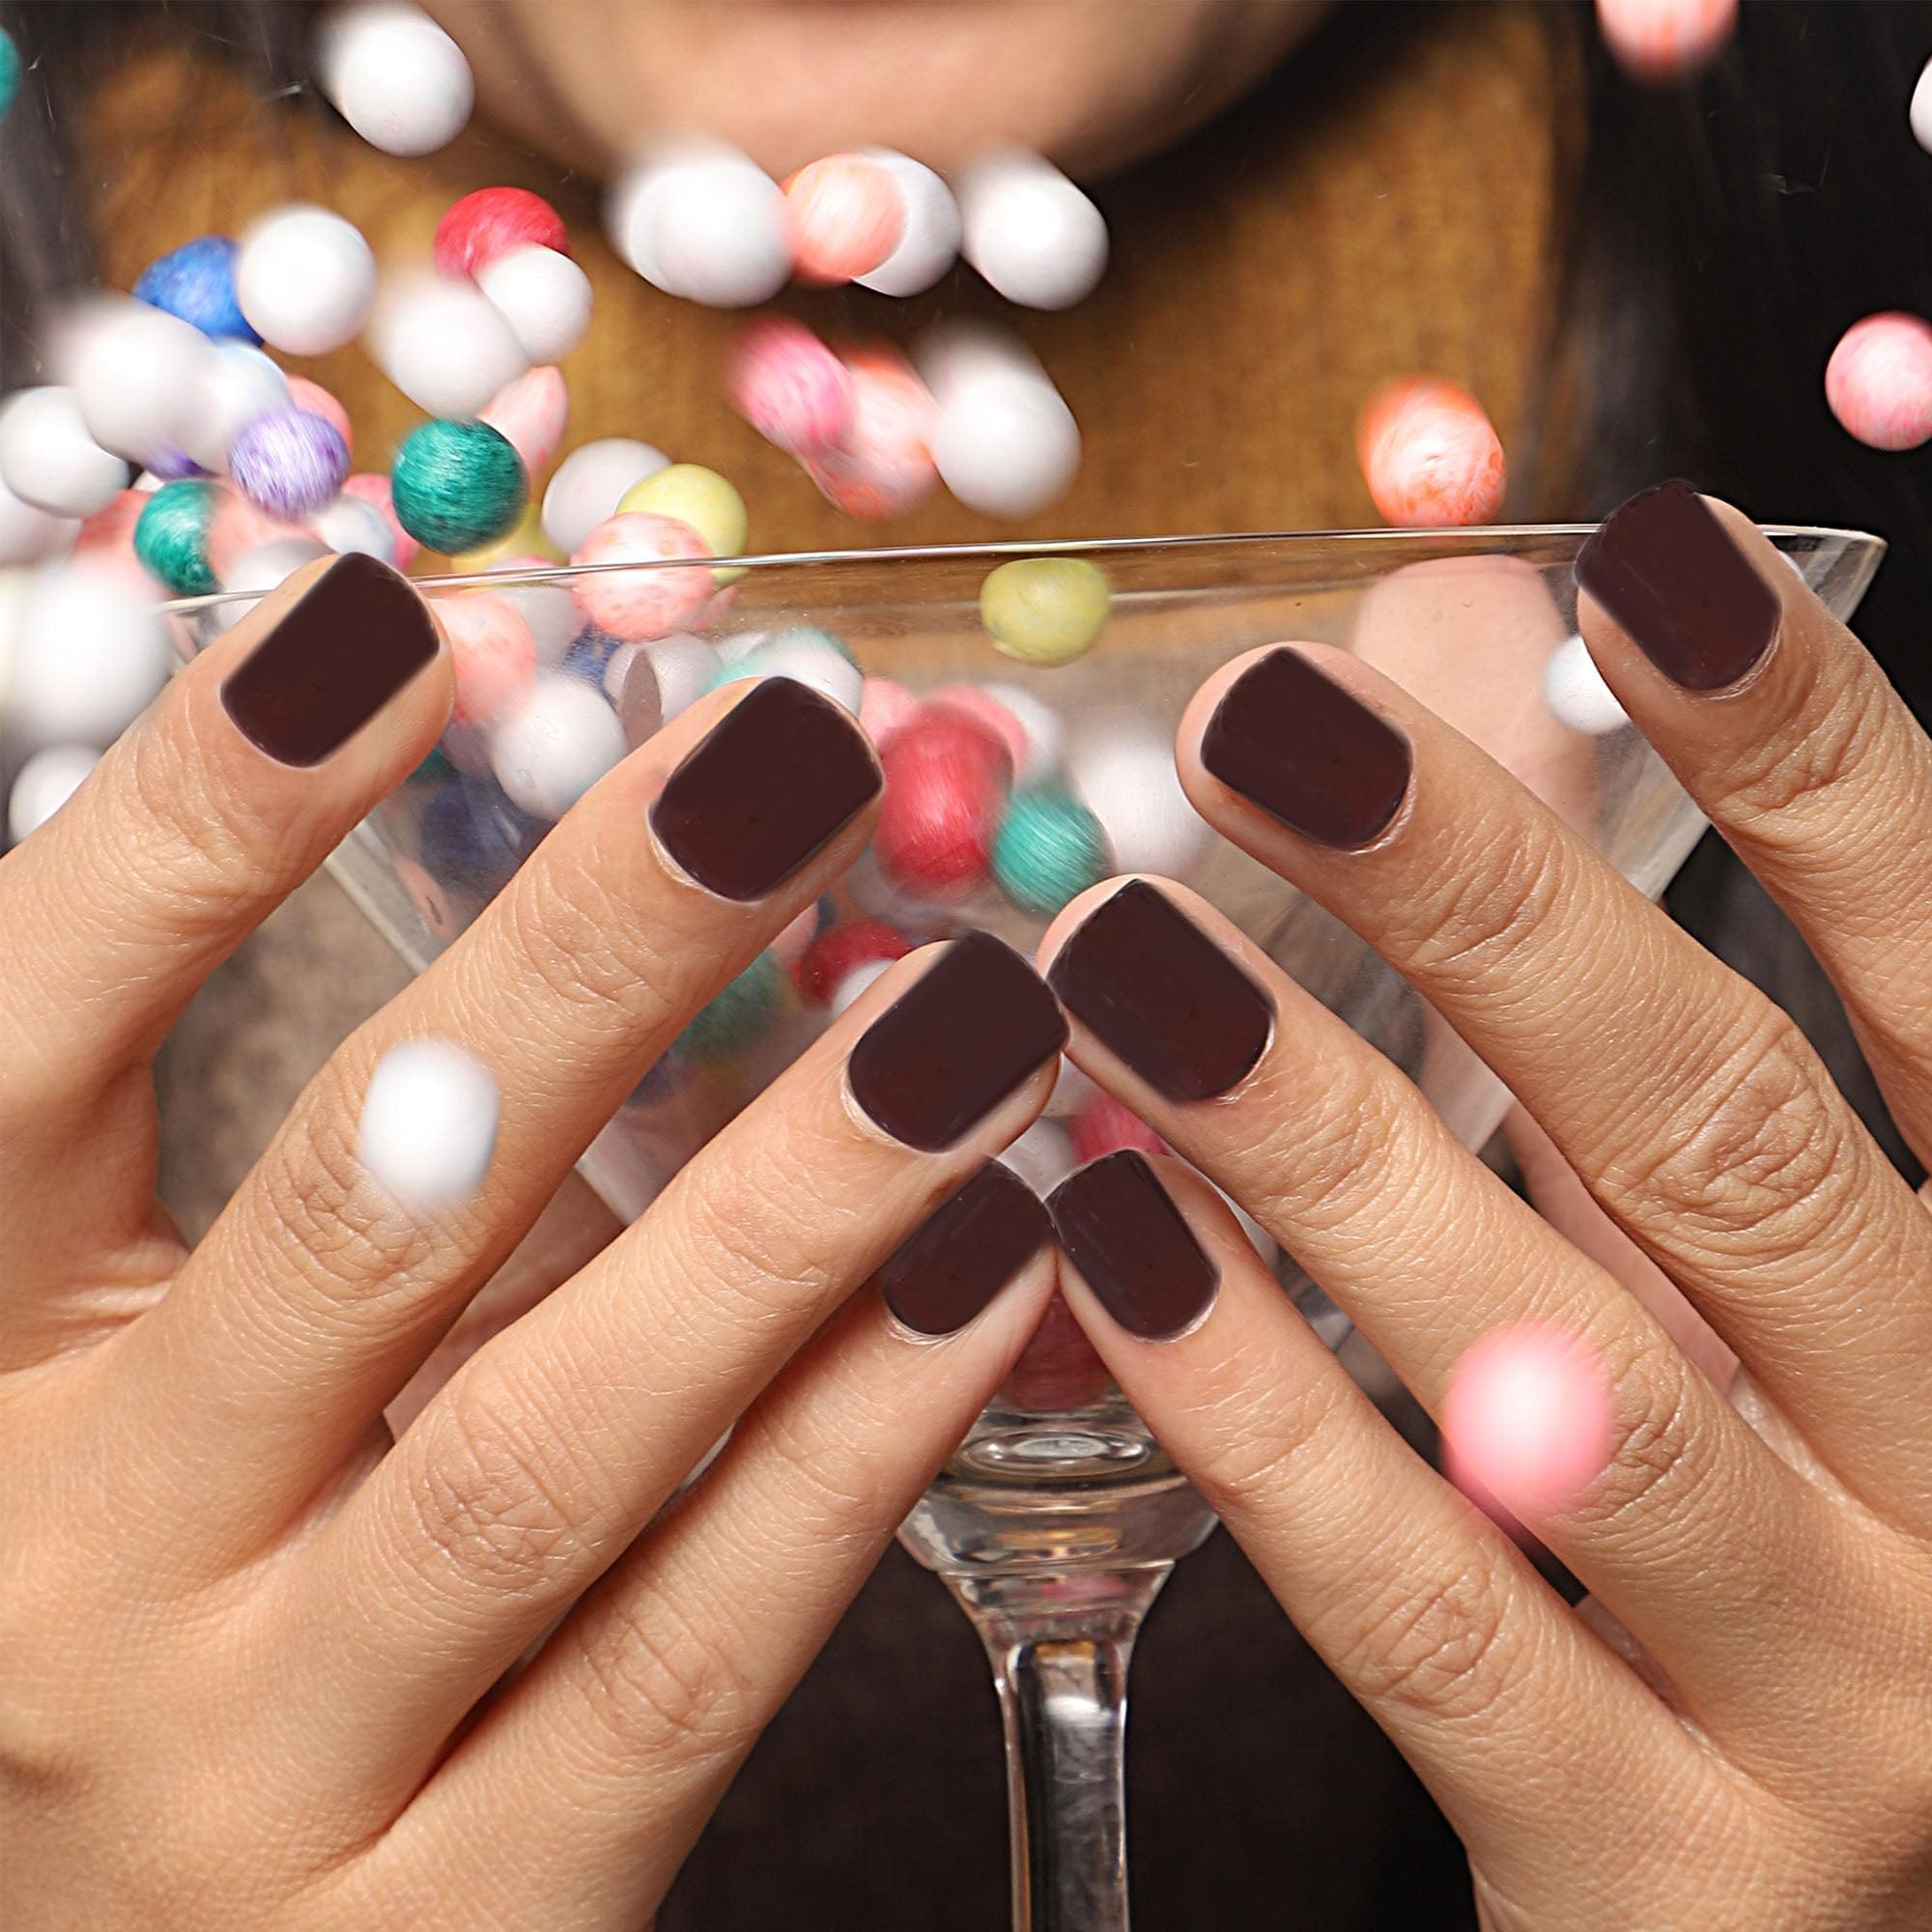 15 Milky Brown Manicures That Capture the Beauty of Neutral Nails